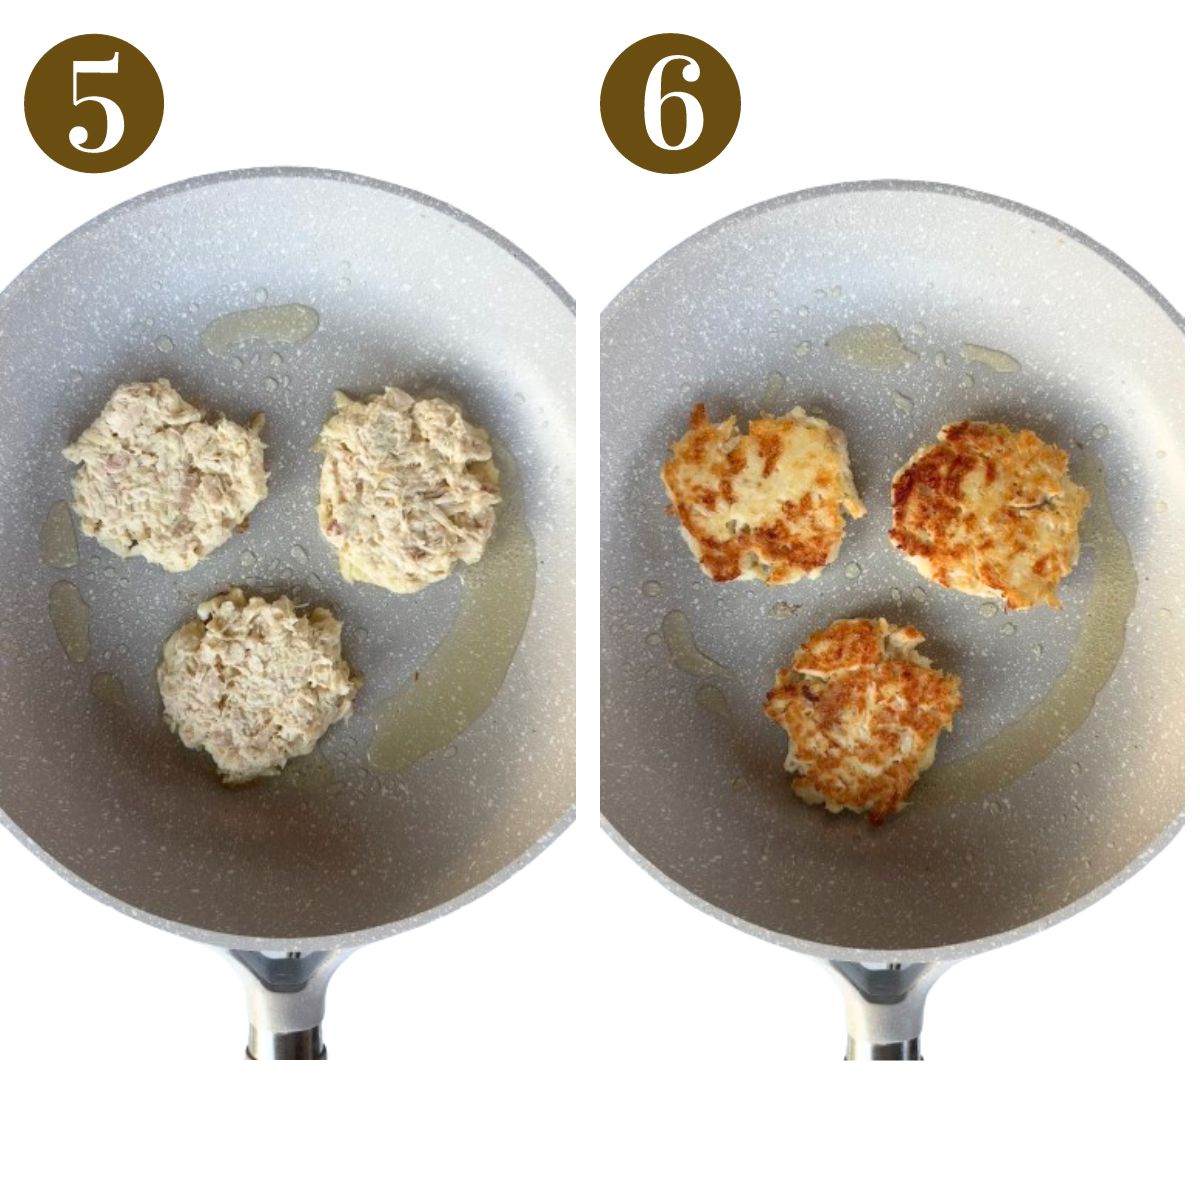 Steps to make chicken fritters.